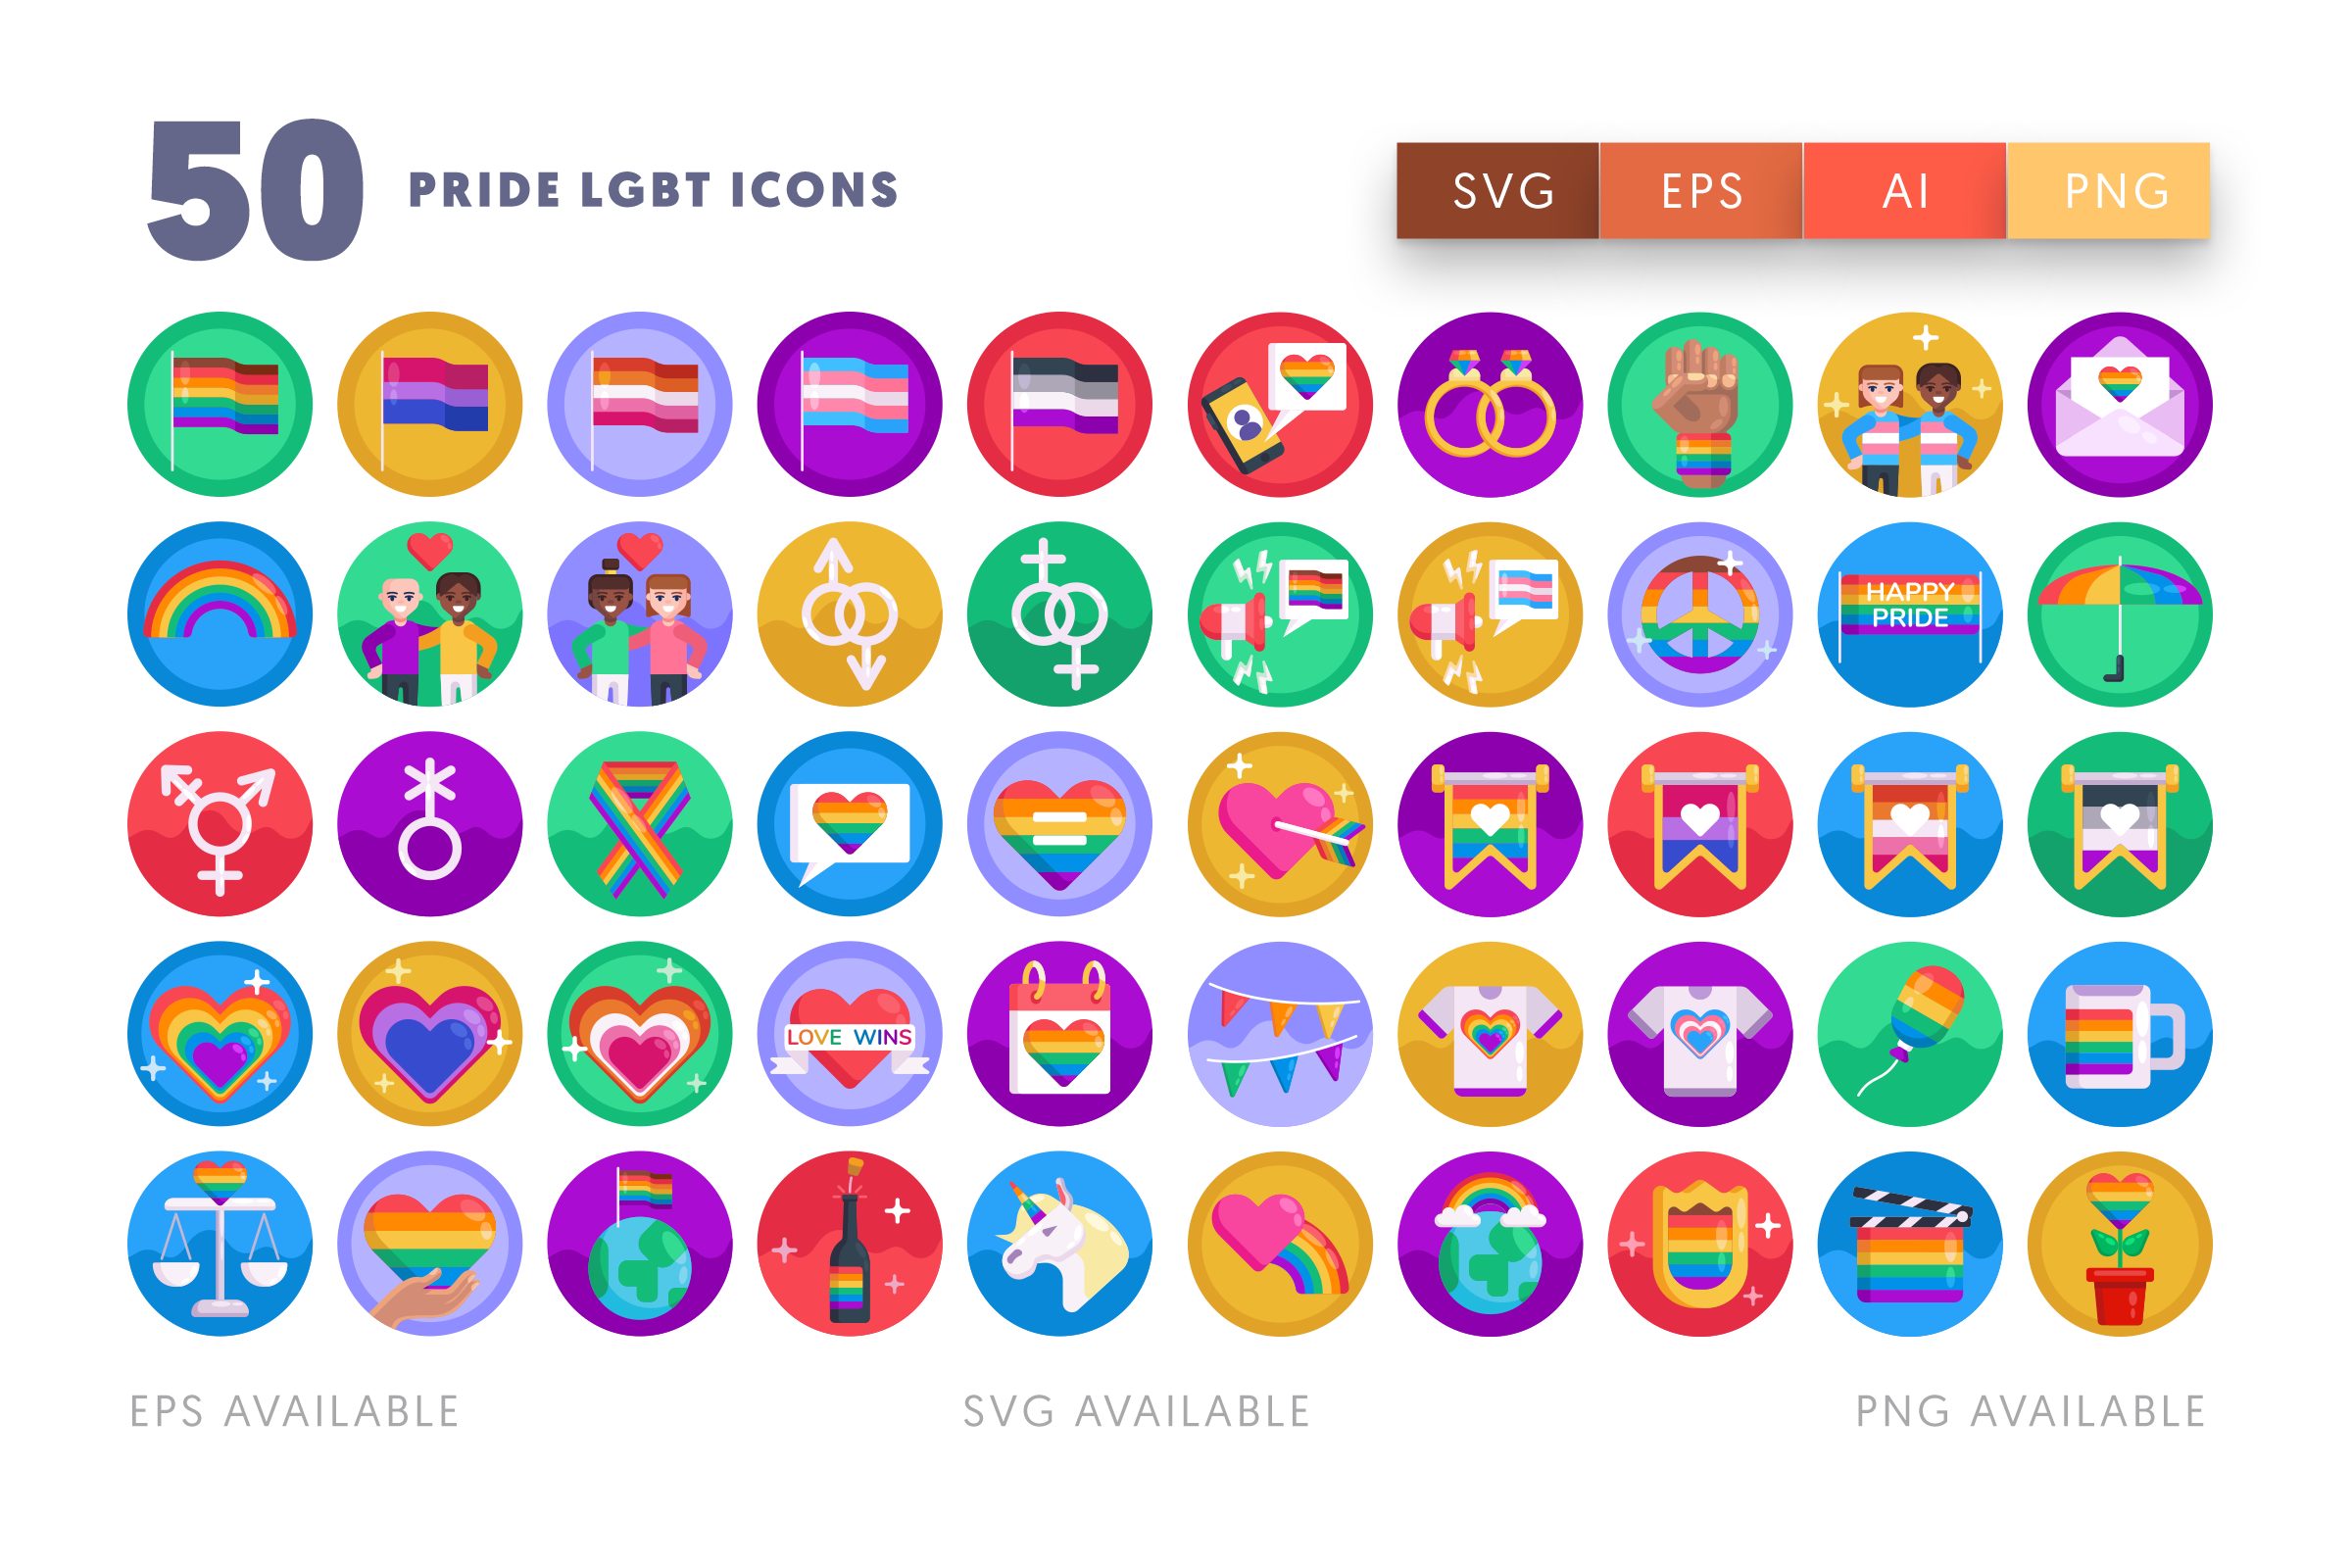 Pride LGBT icons png/svg/eps